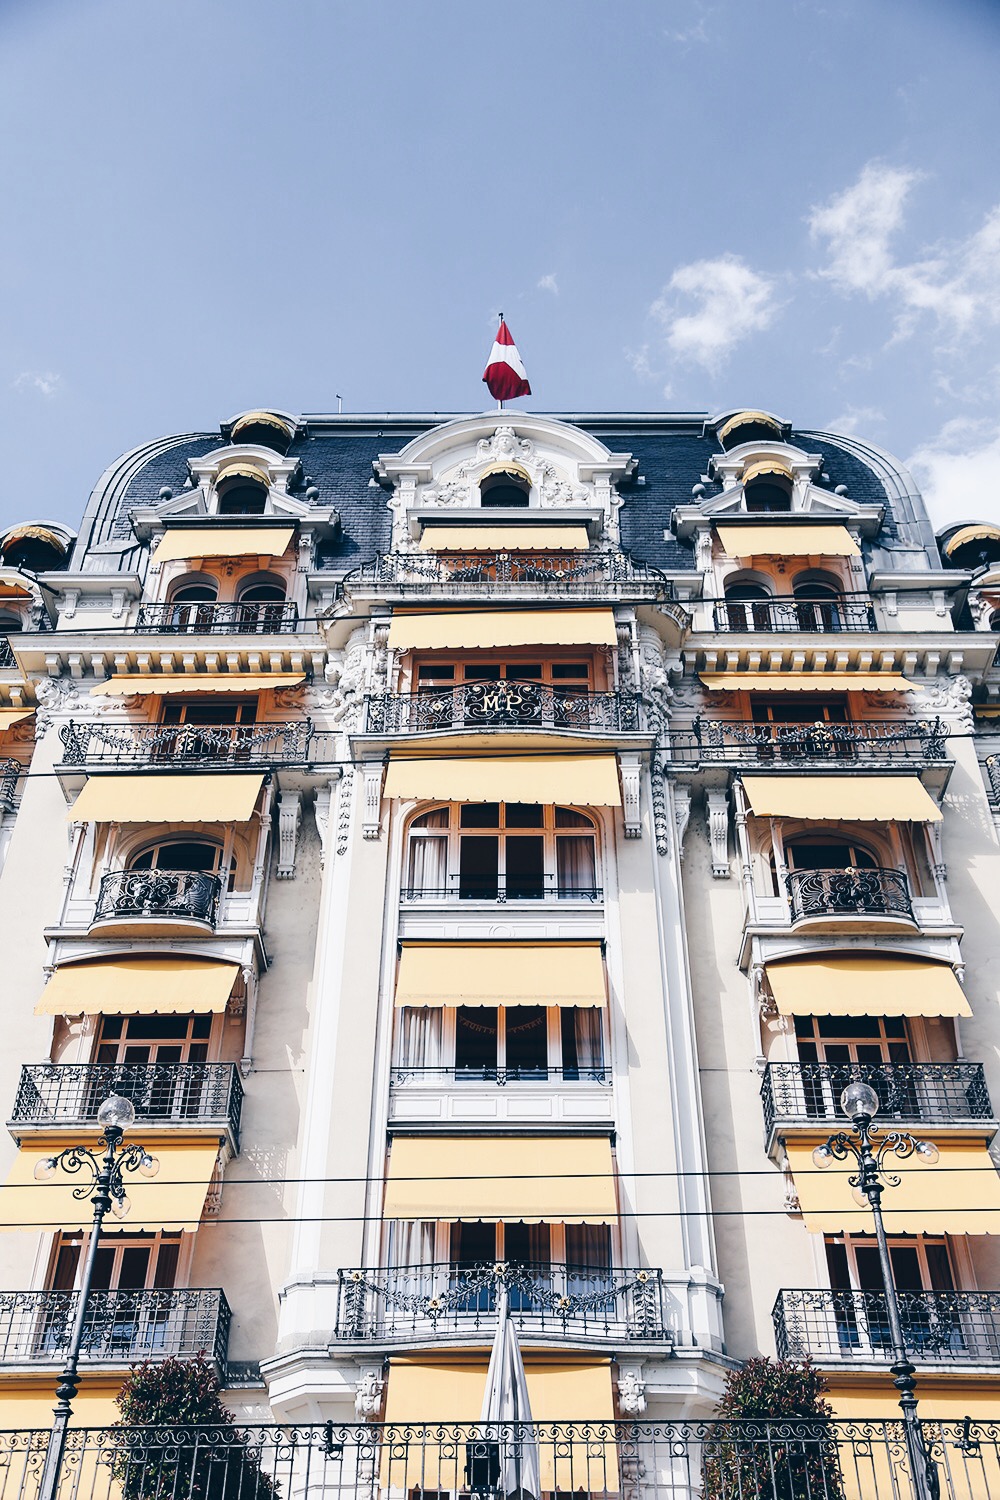 In one of our very first lists at This Is Glamorous&nbsp;had mentioned The Montreux Jazz Festival as one of the top five music festivals worth travelling for. The Fairmont Le Montreaux Palace could make its own list of places to see. Built in 1906, …